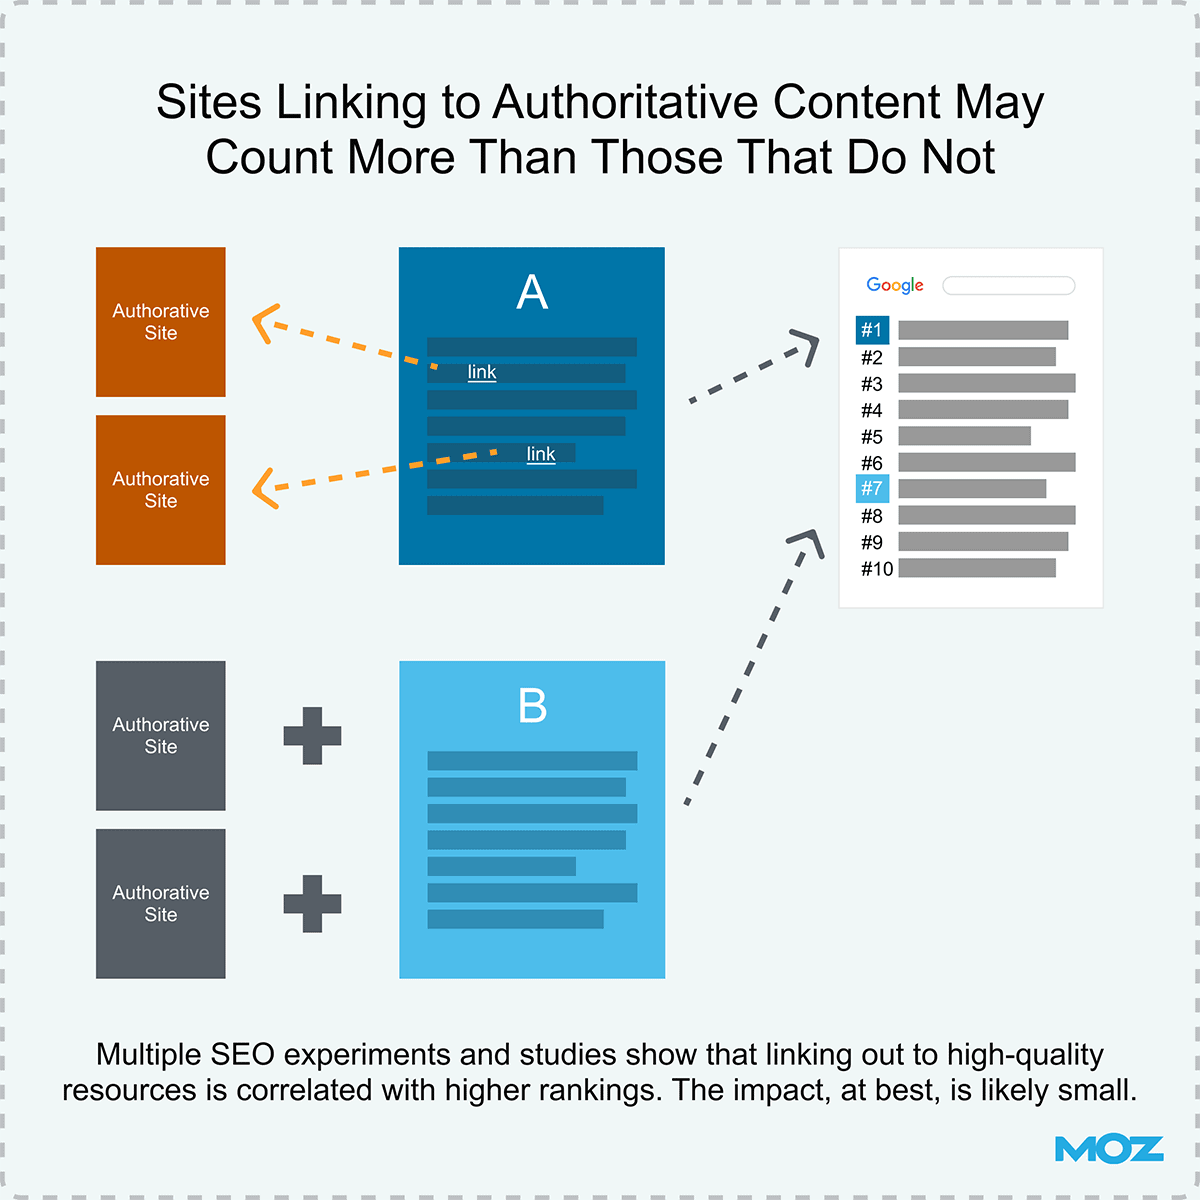 Sites linking to authoritative content may count more than those that do not